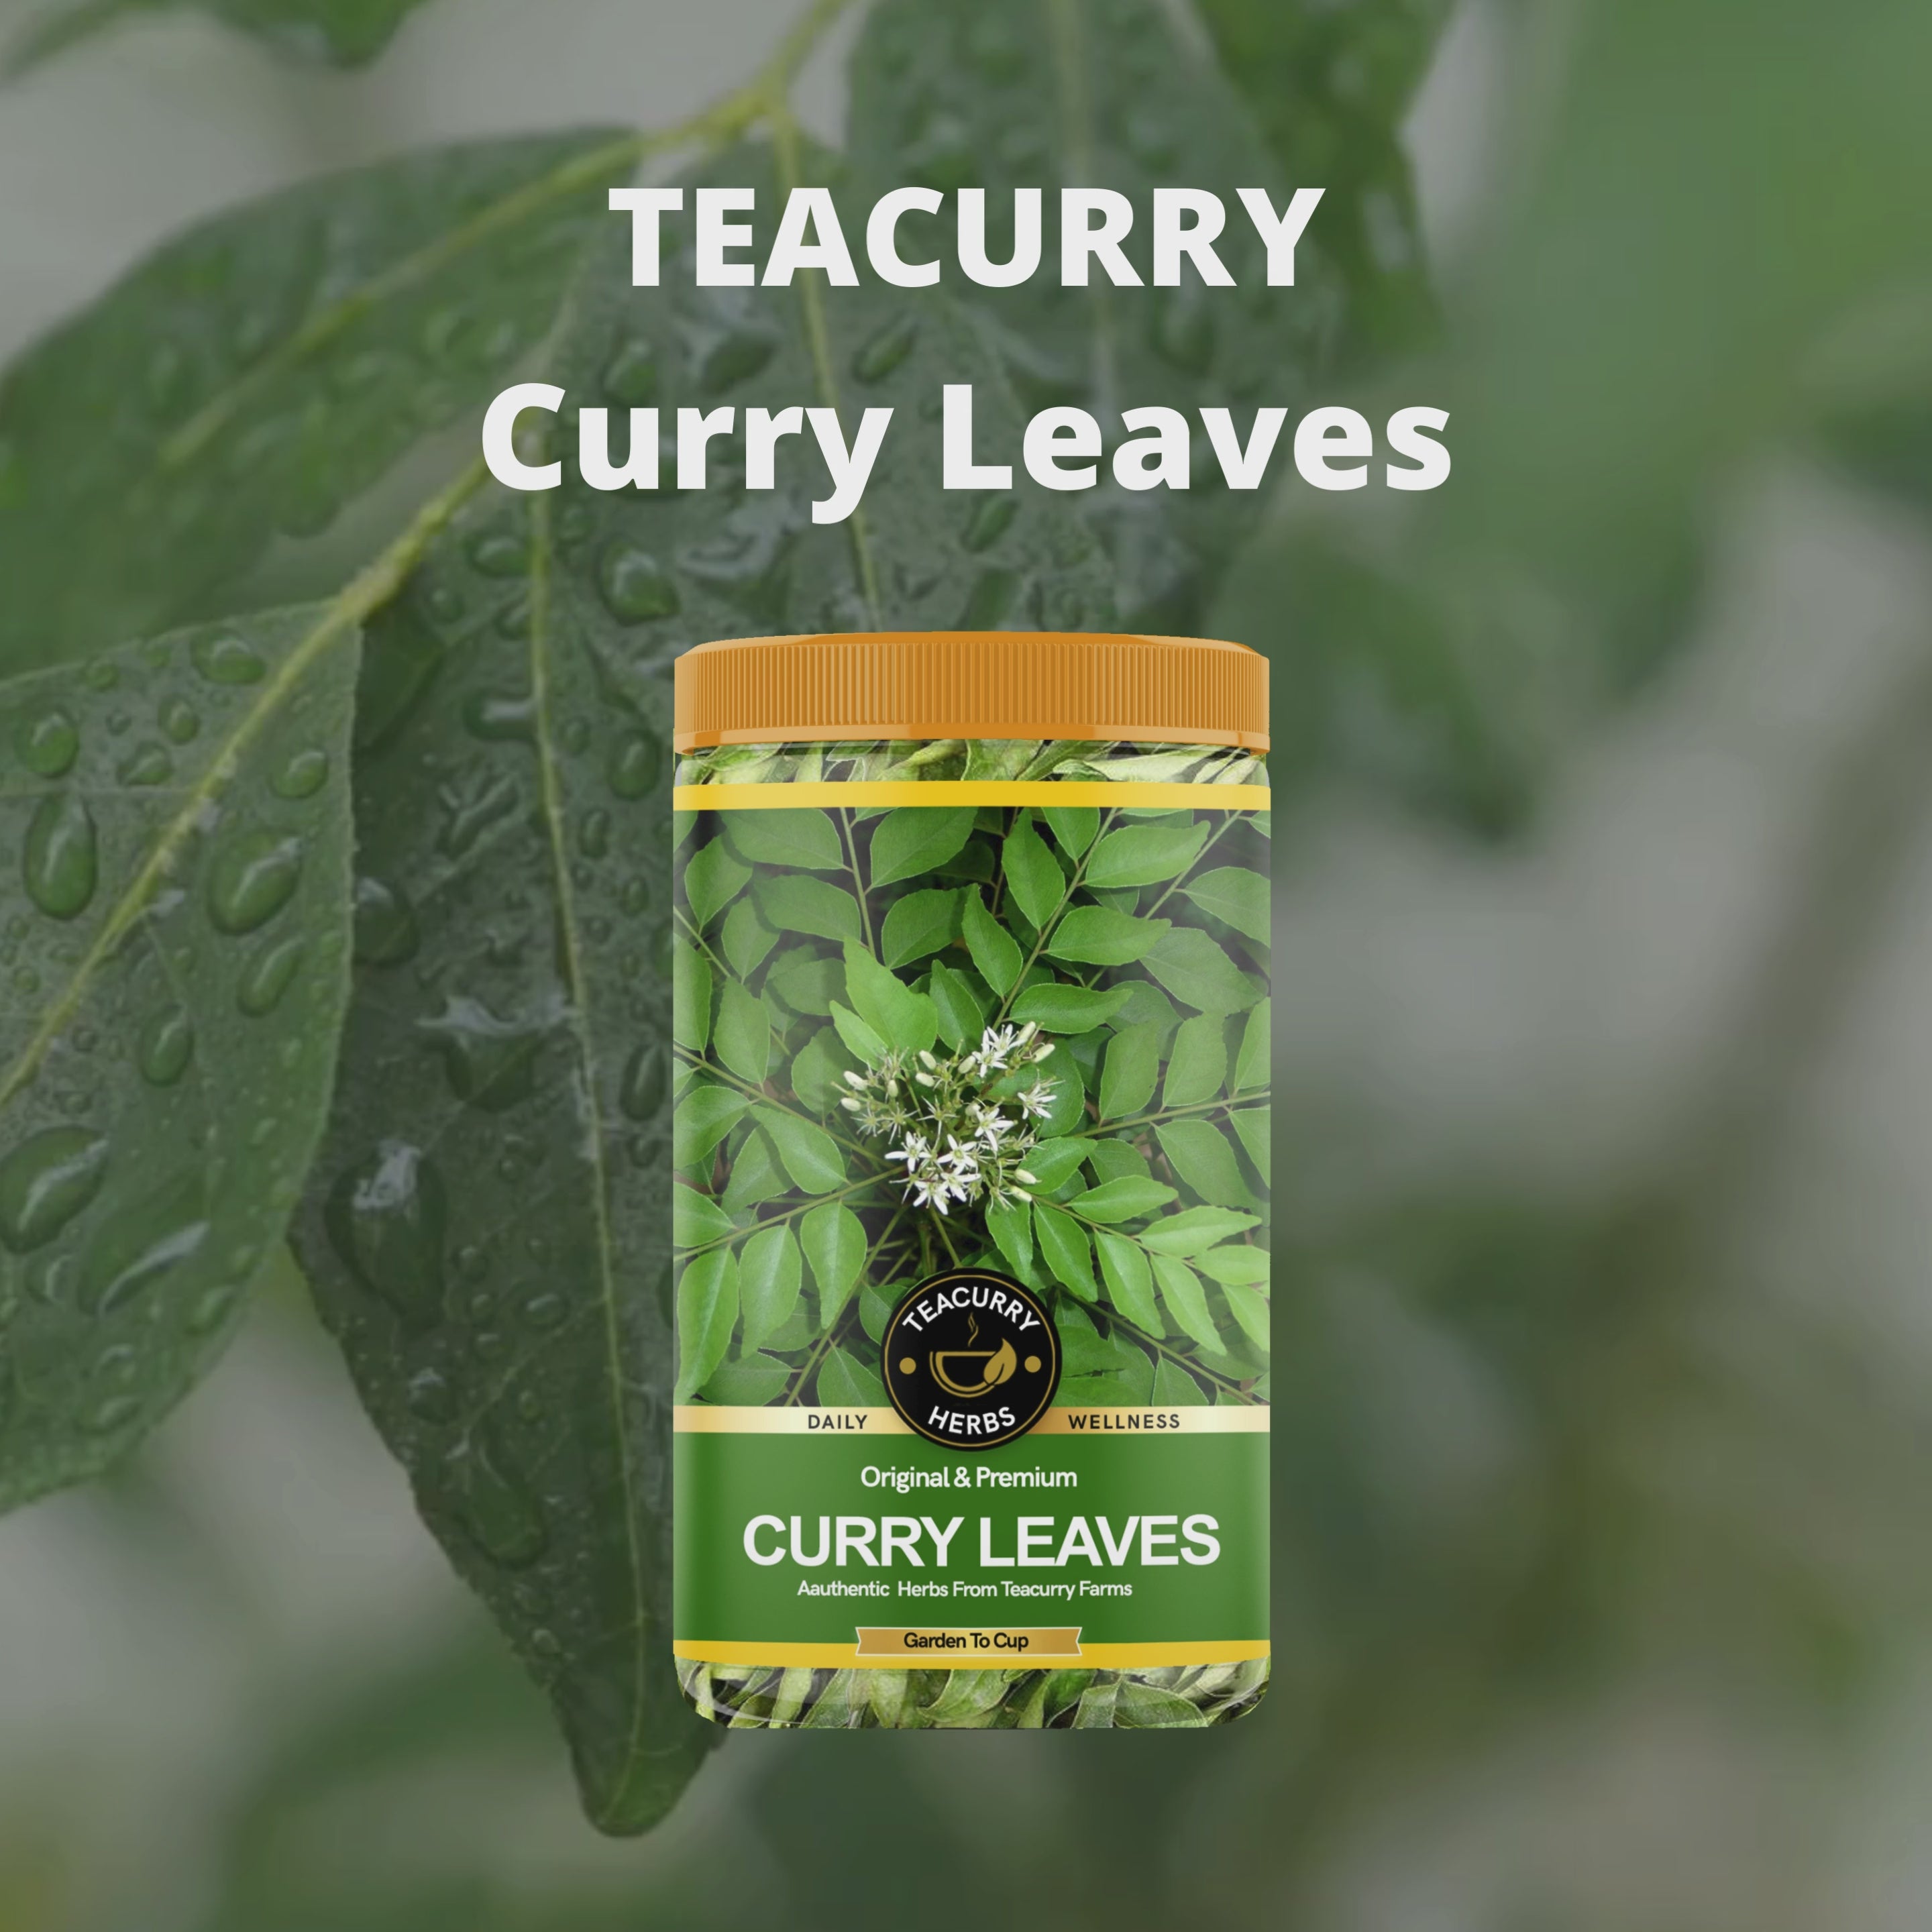 Teacurry Curry Leaves Video